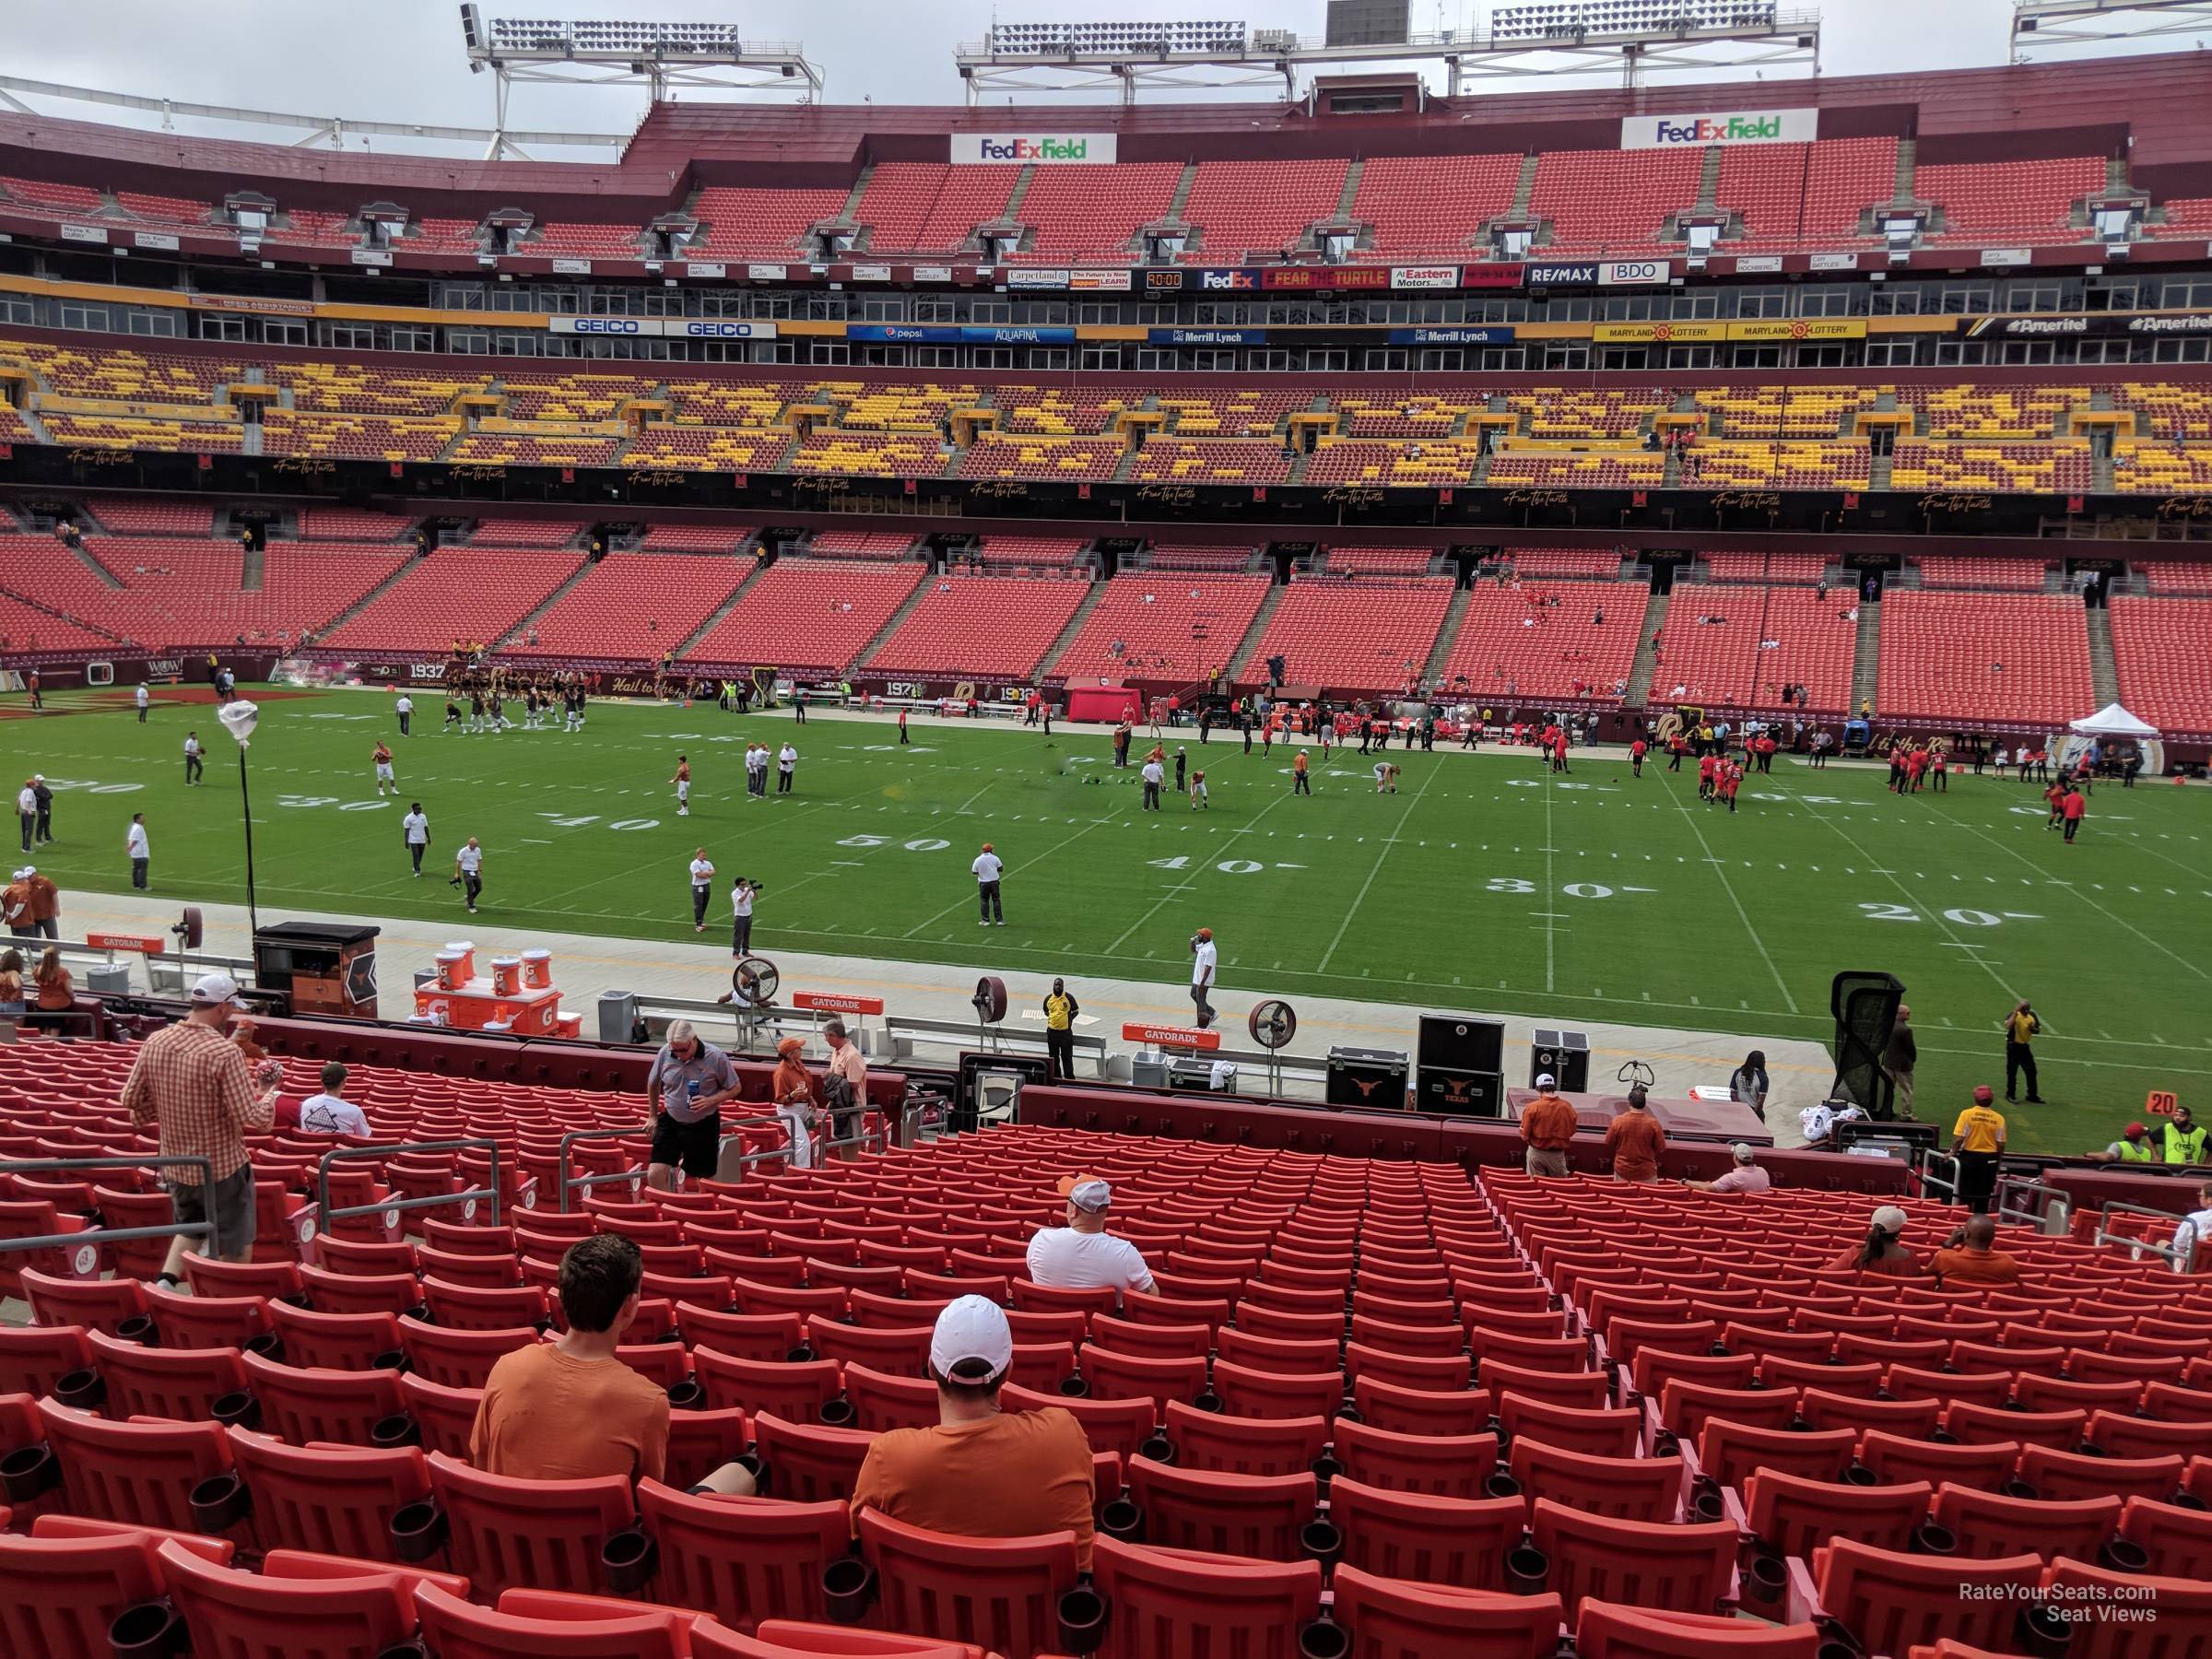 section 120, row 25 seat view  - fedexfield